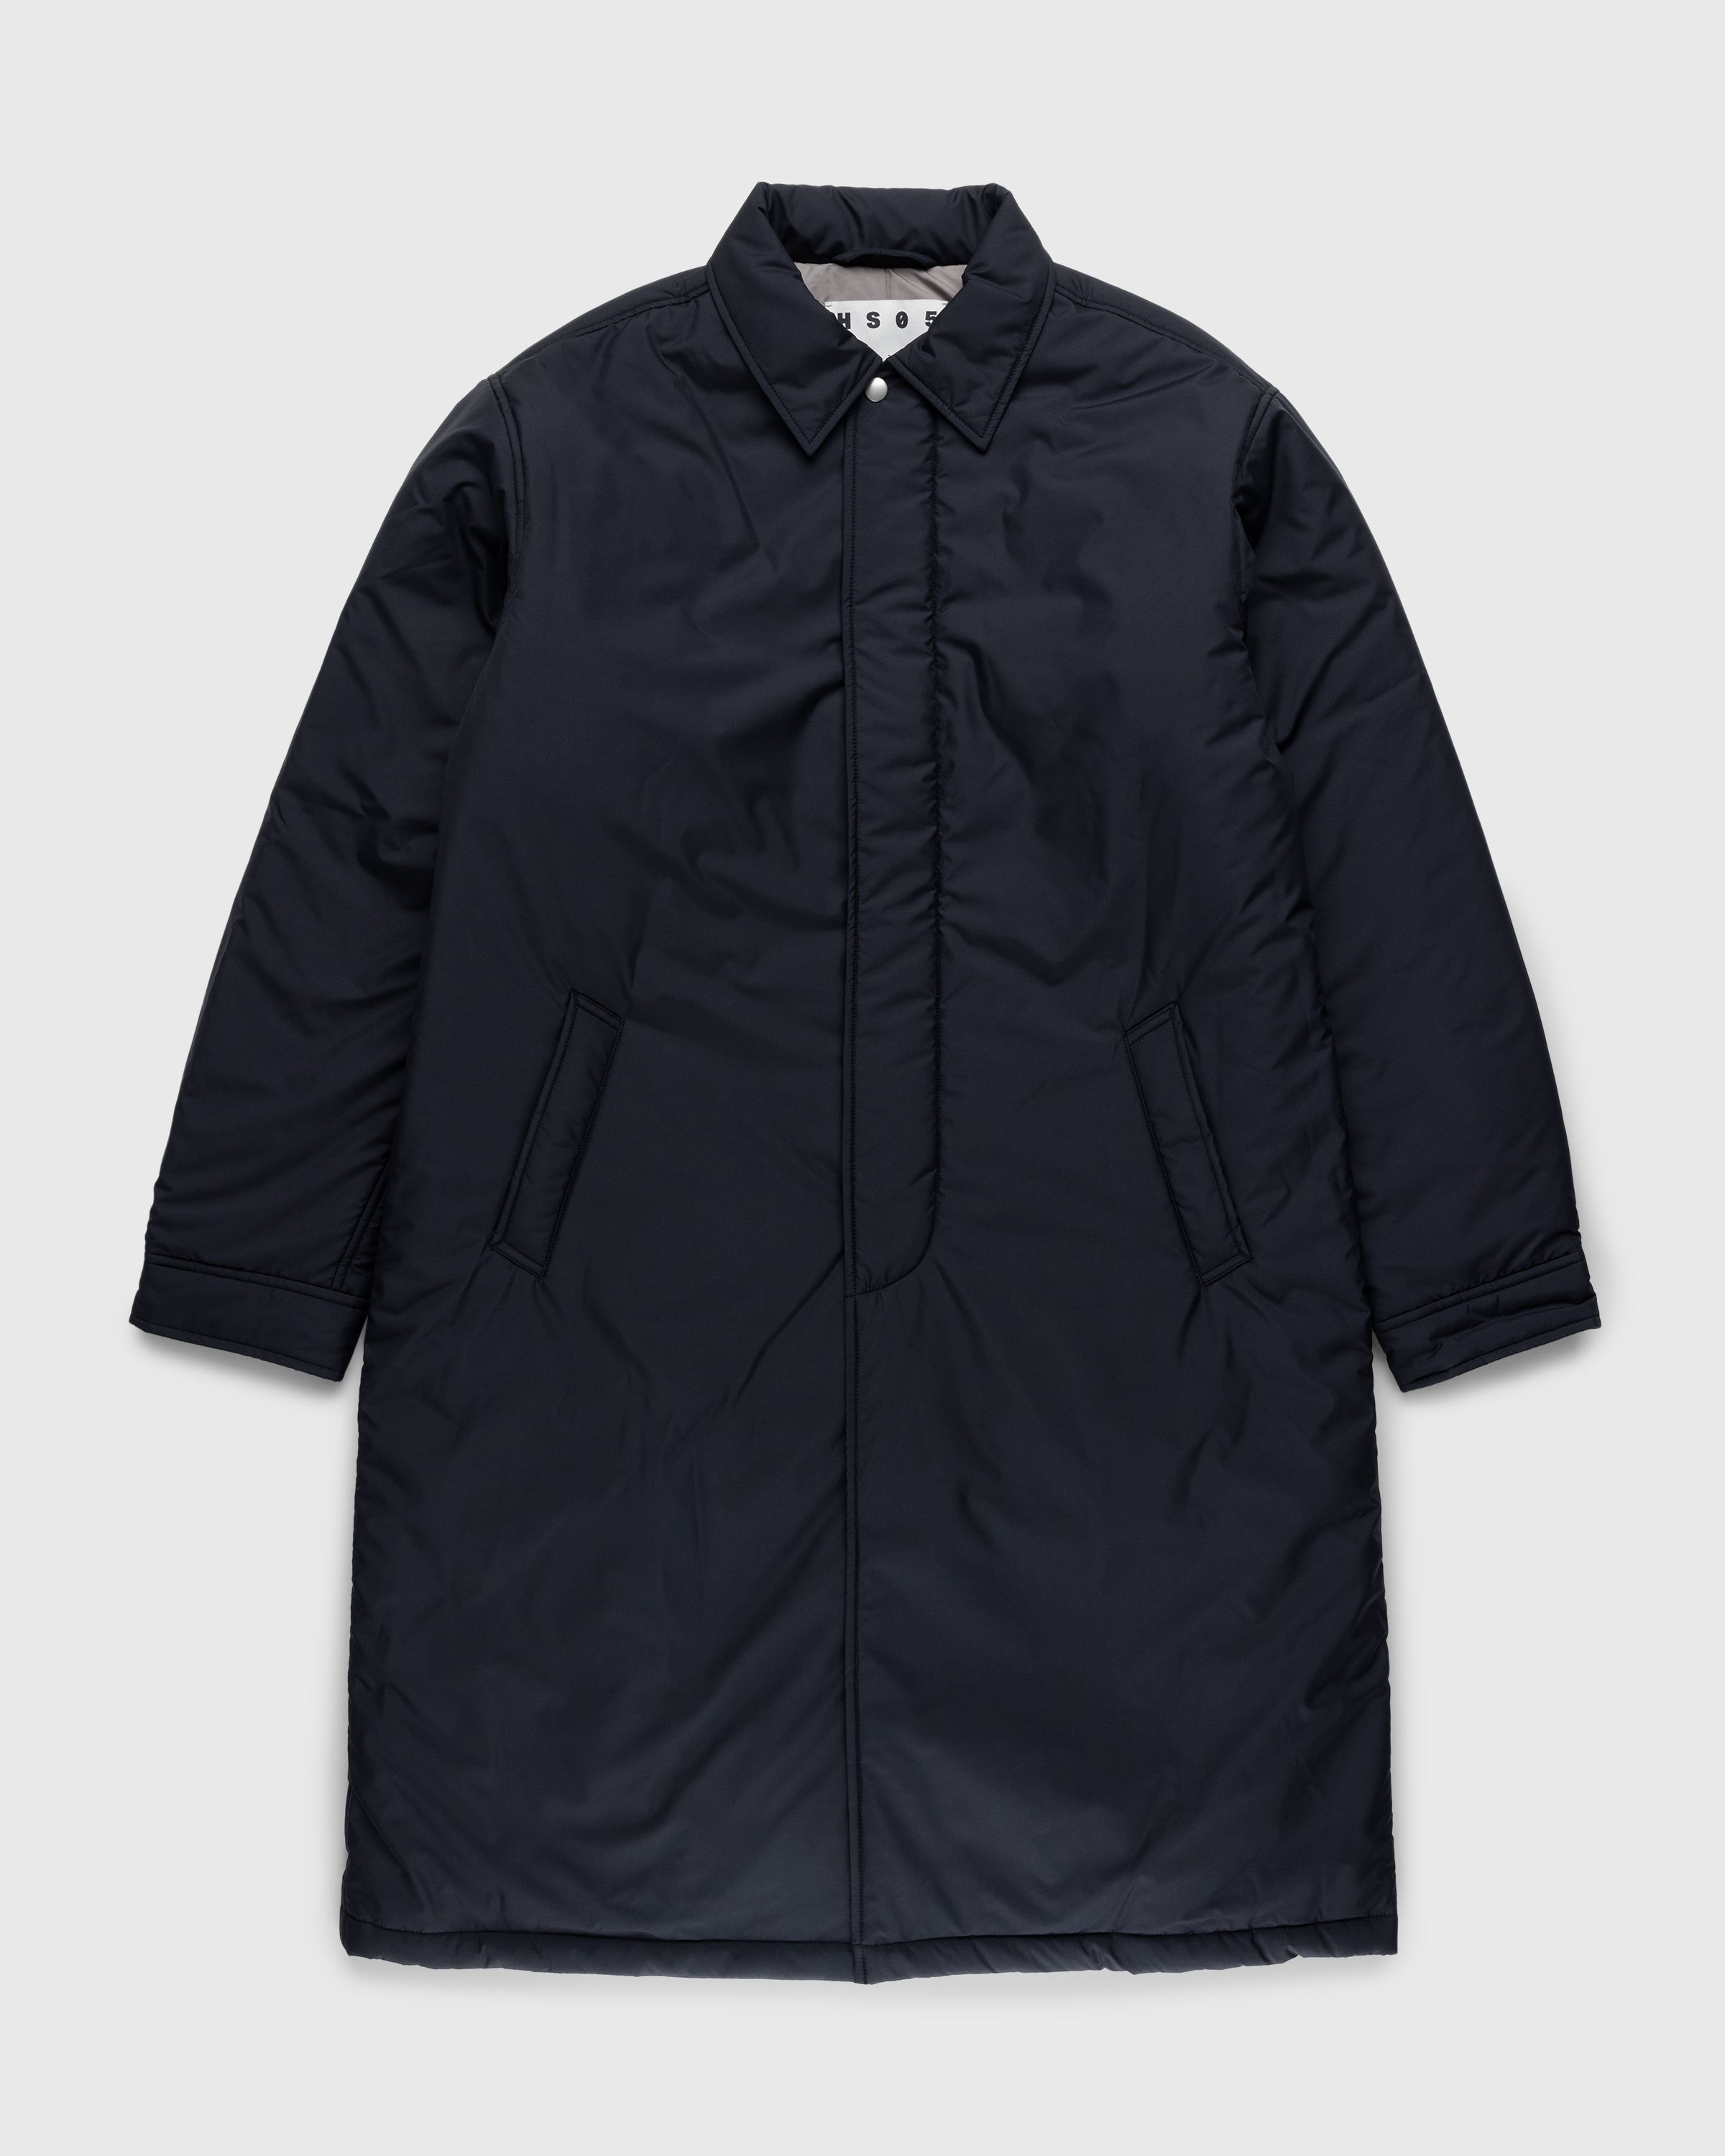 Highsnobiety HS05 – Light Insulated Eco-Poly Trench Coat Black - Outerwear - Black - Image 1